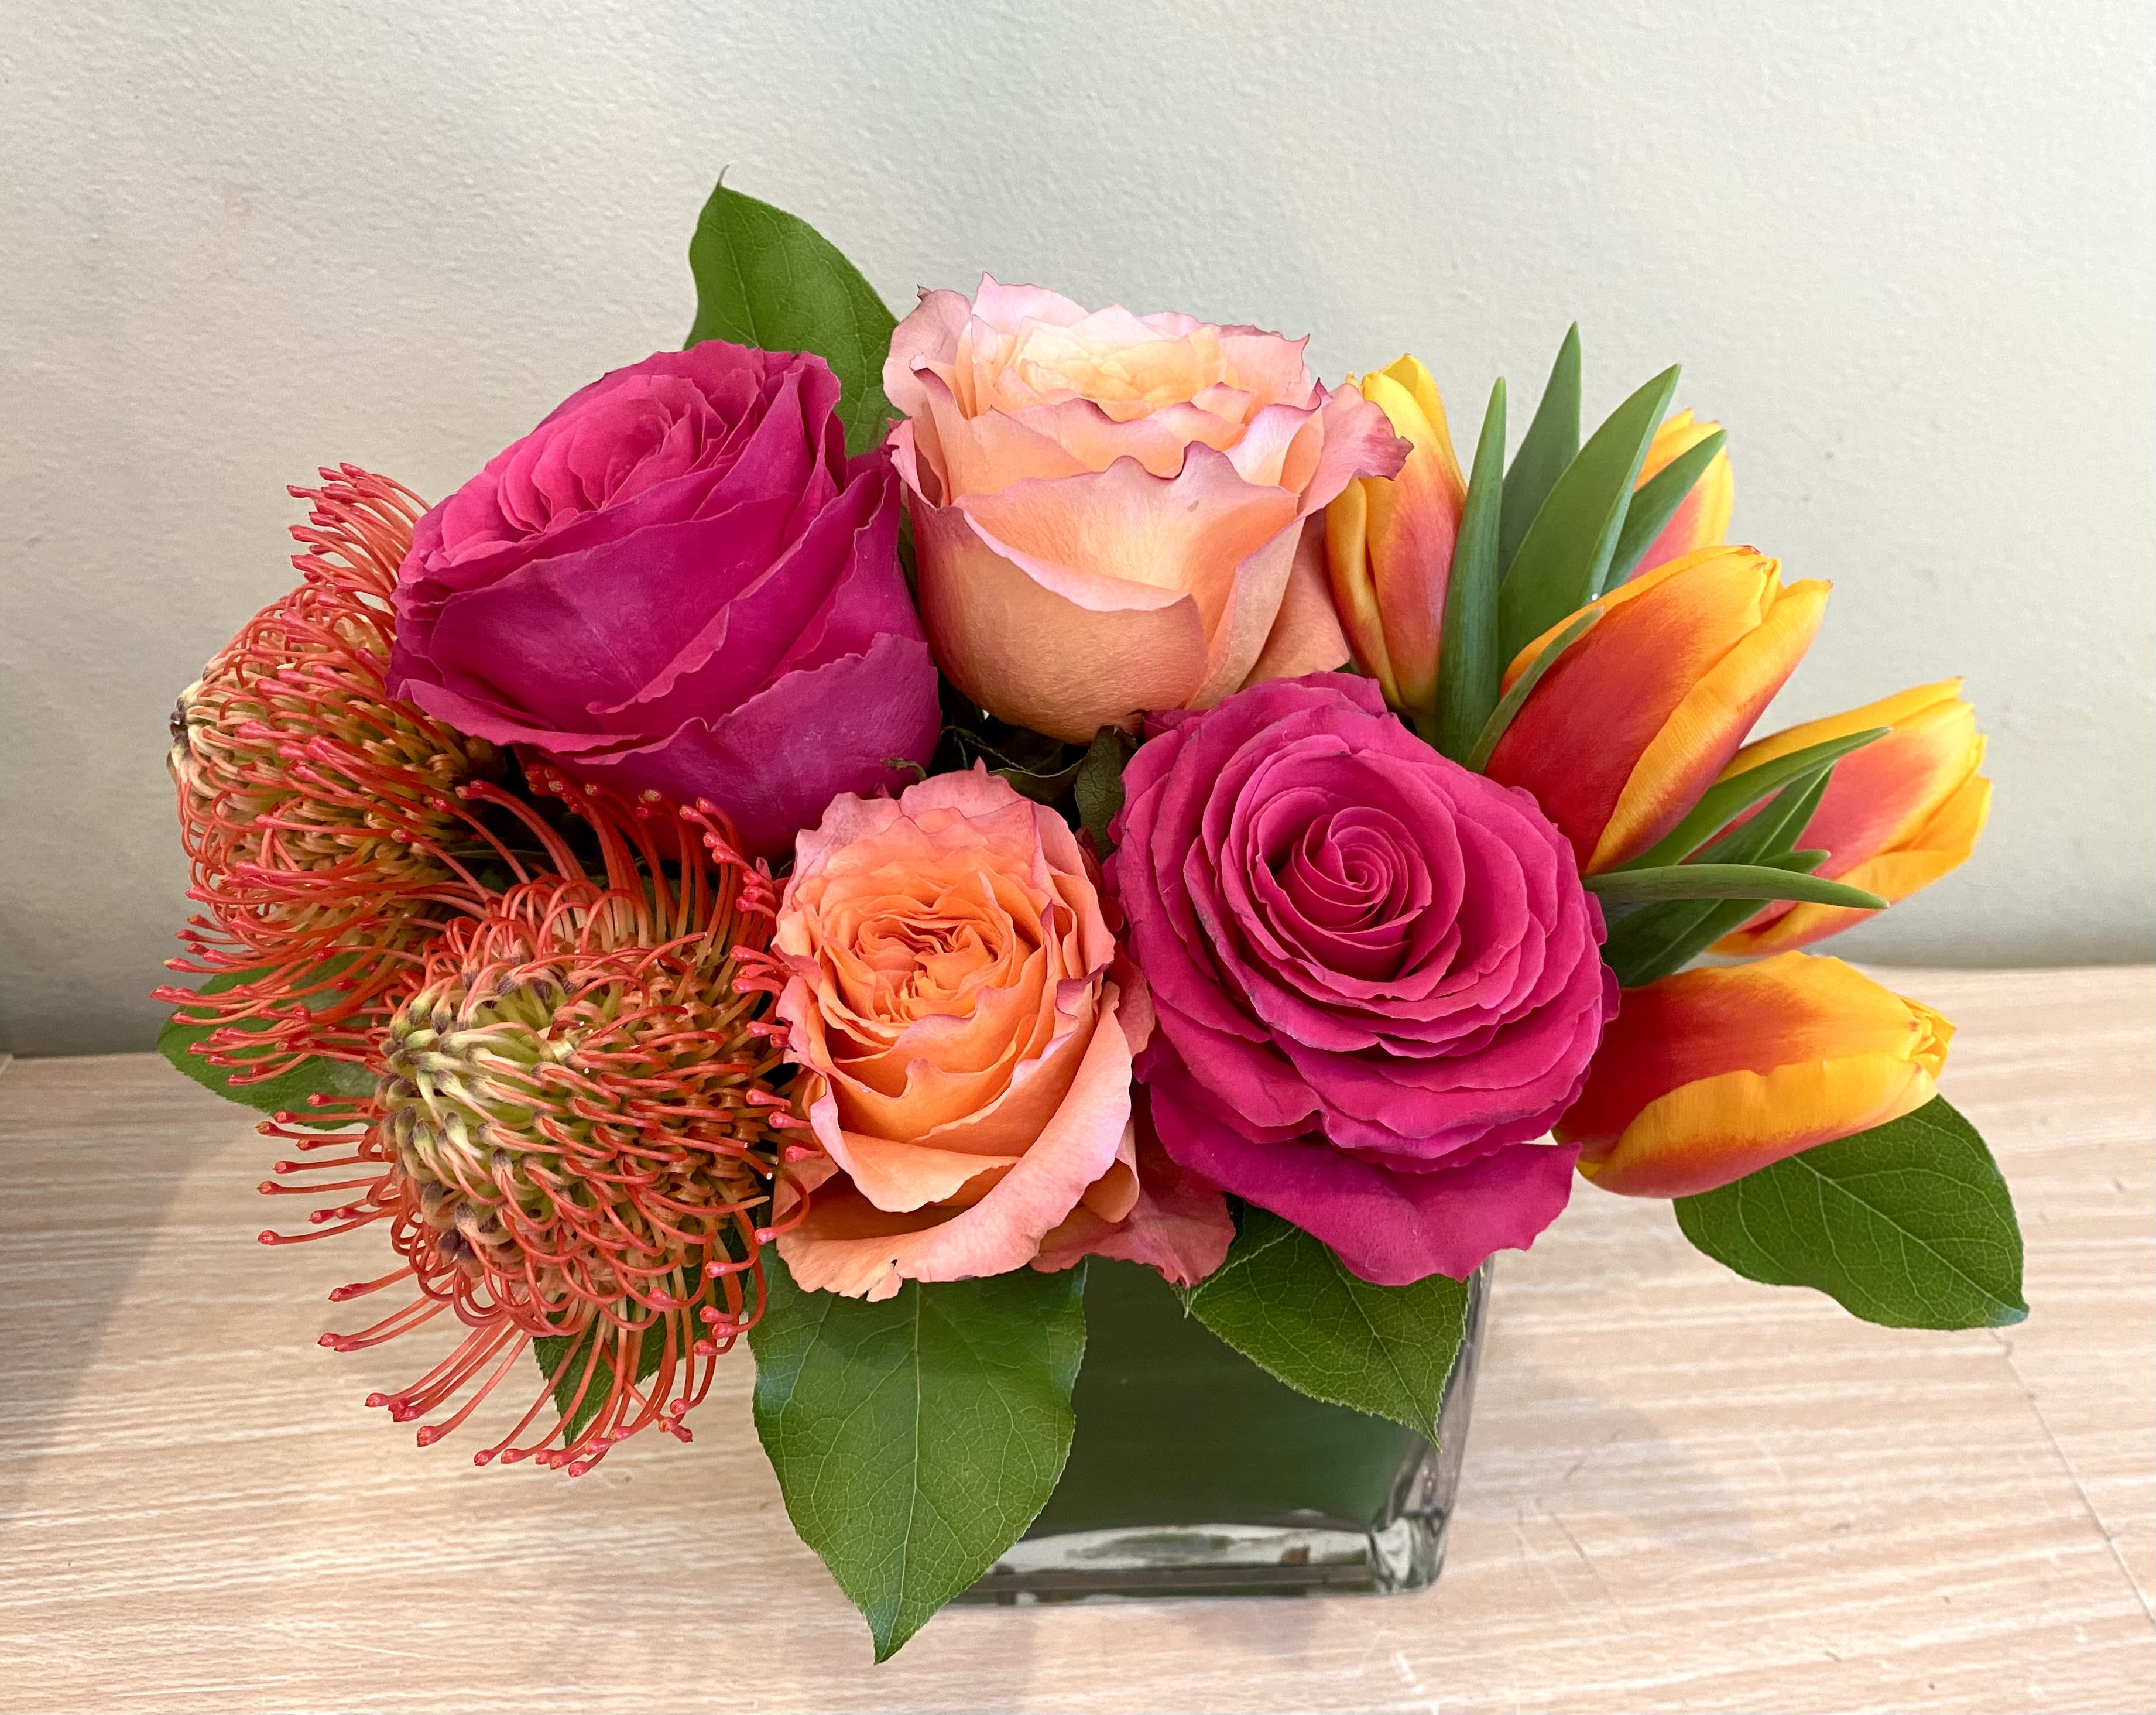 Free Spirit   - Free spirit roses for romance, tulips for spring, pin cushion protea for a trendy touch!  